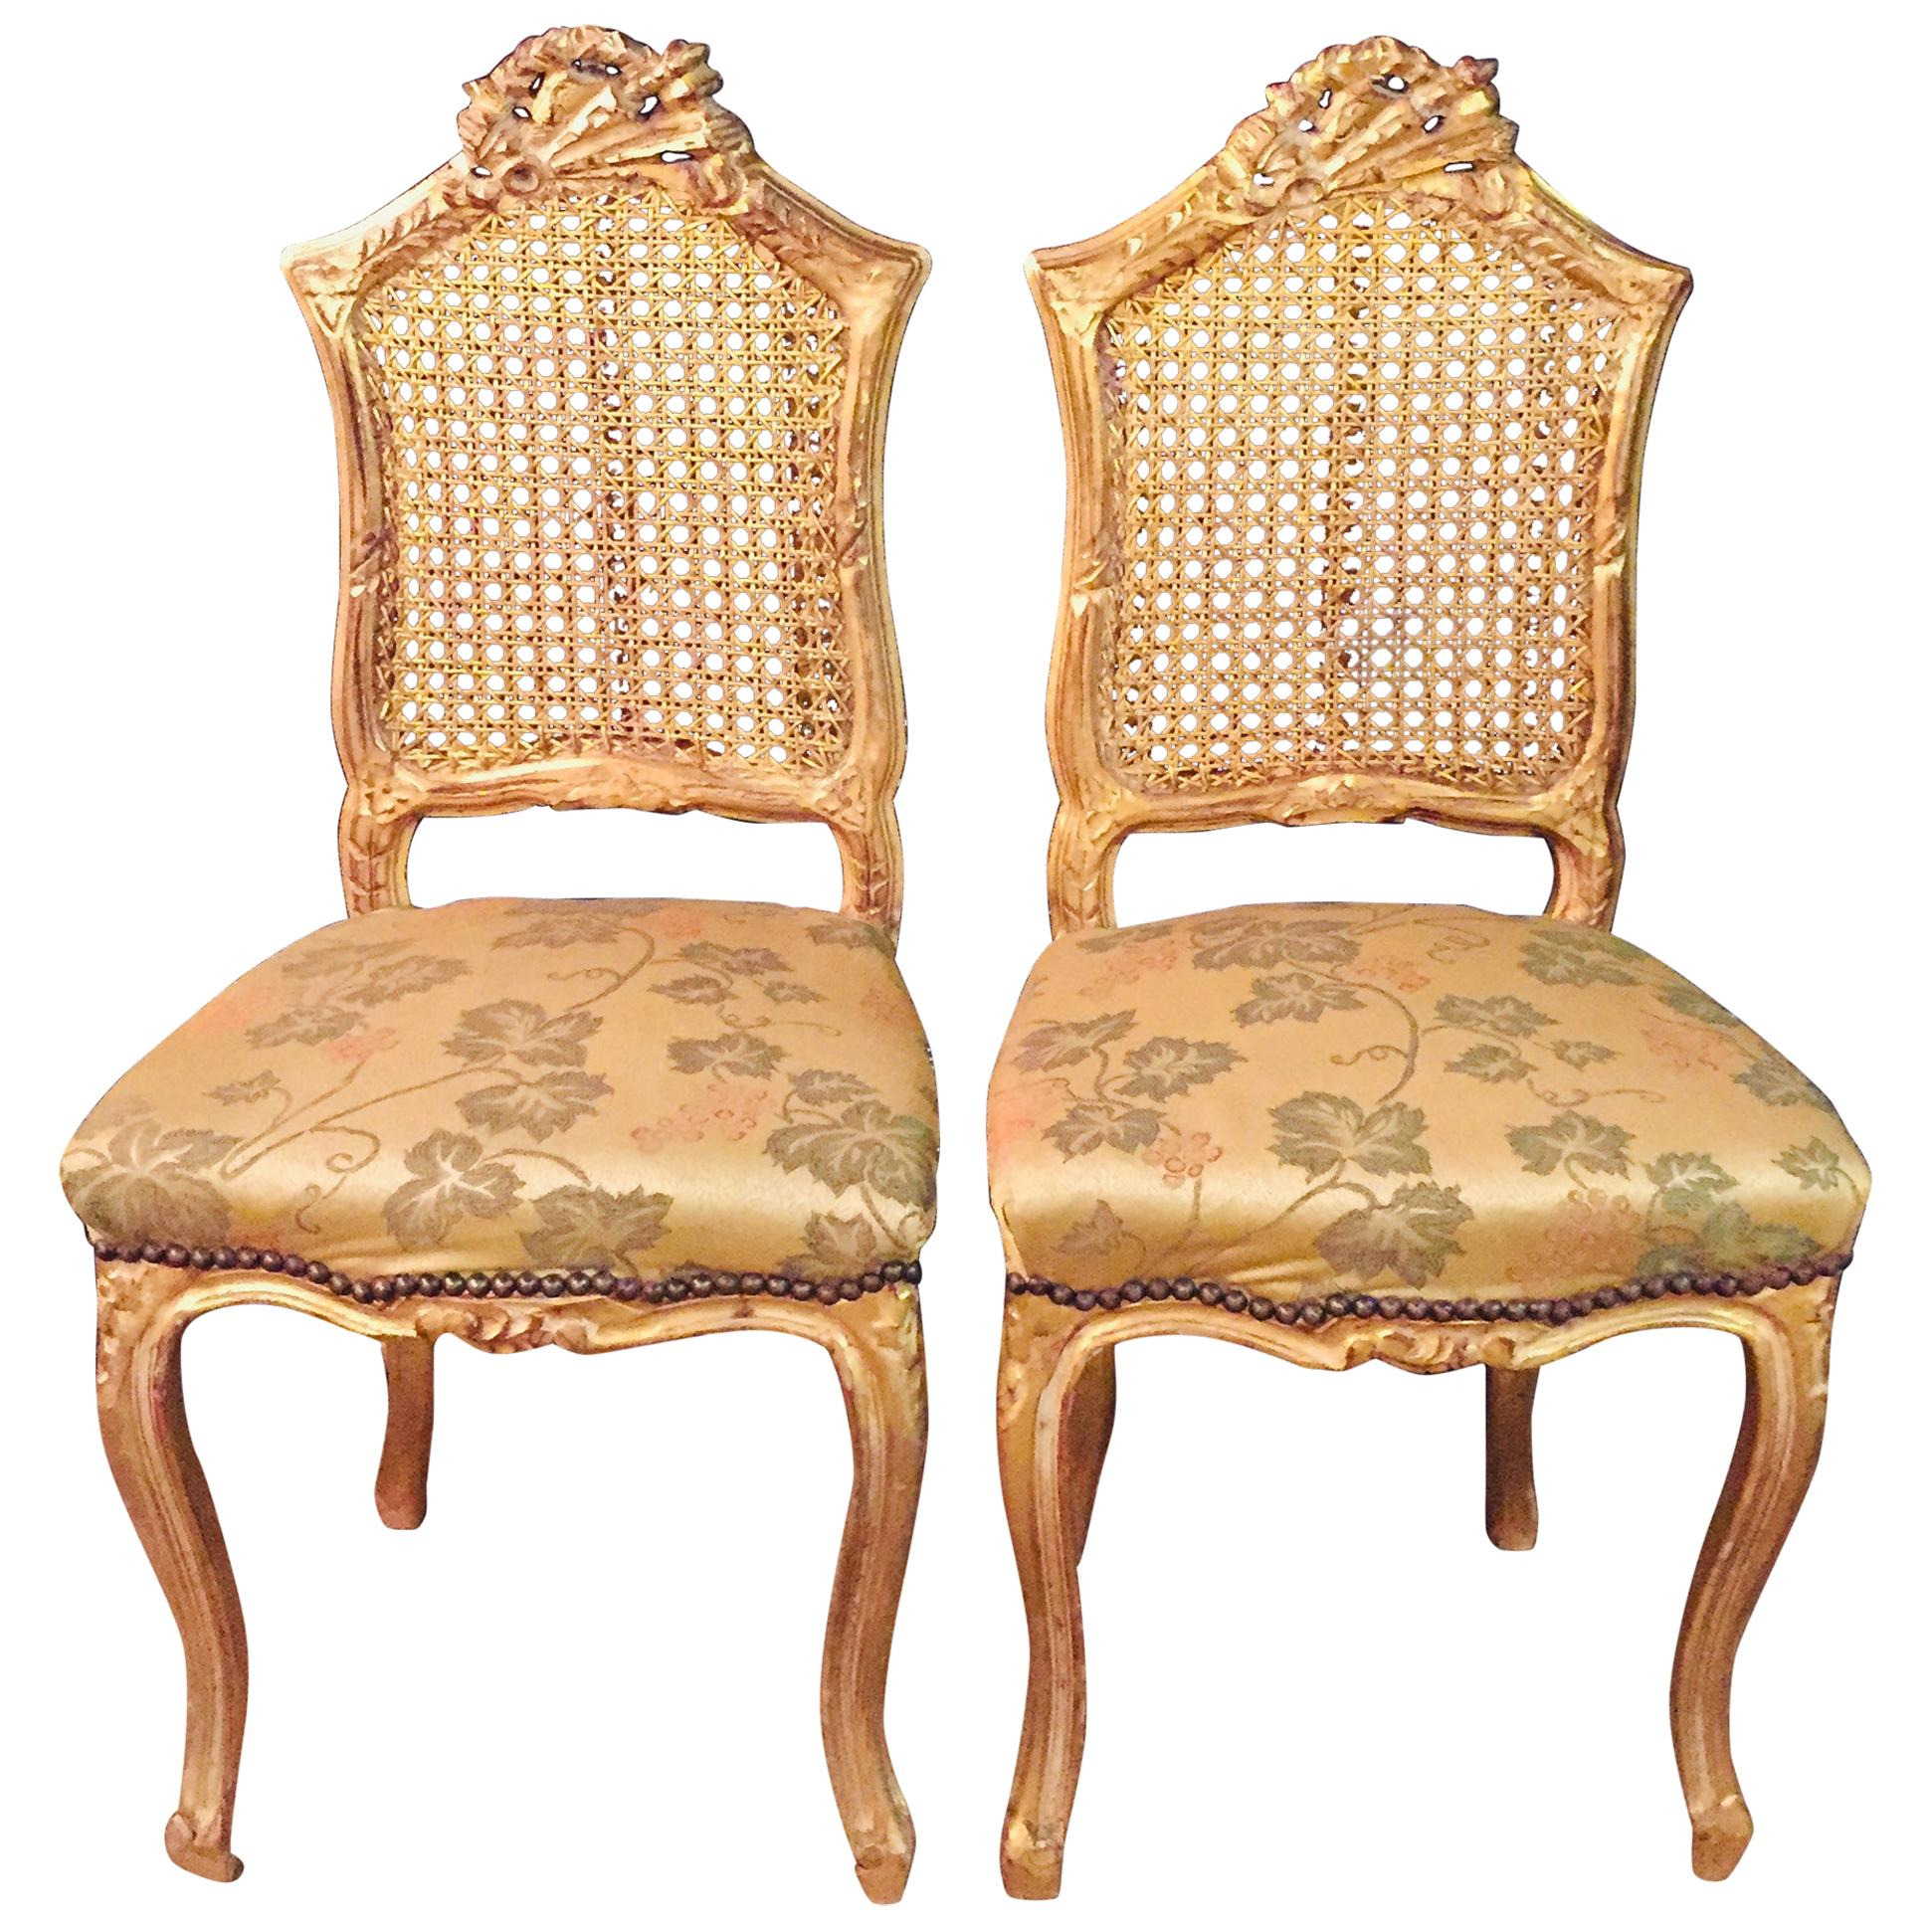 2 Small Chairs in the antique Louis Seize Stil France beech 